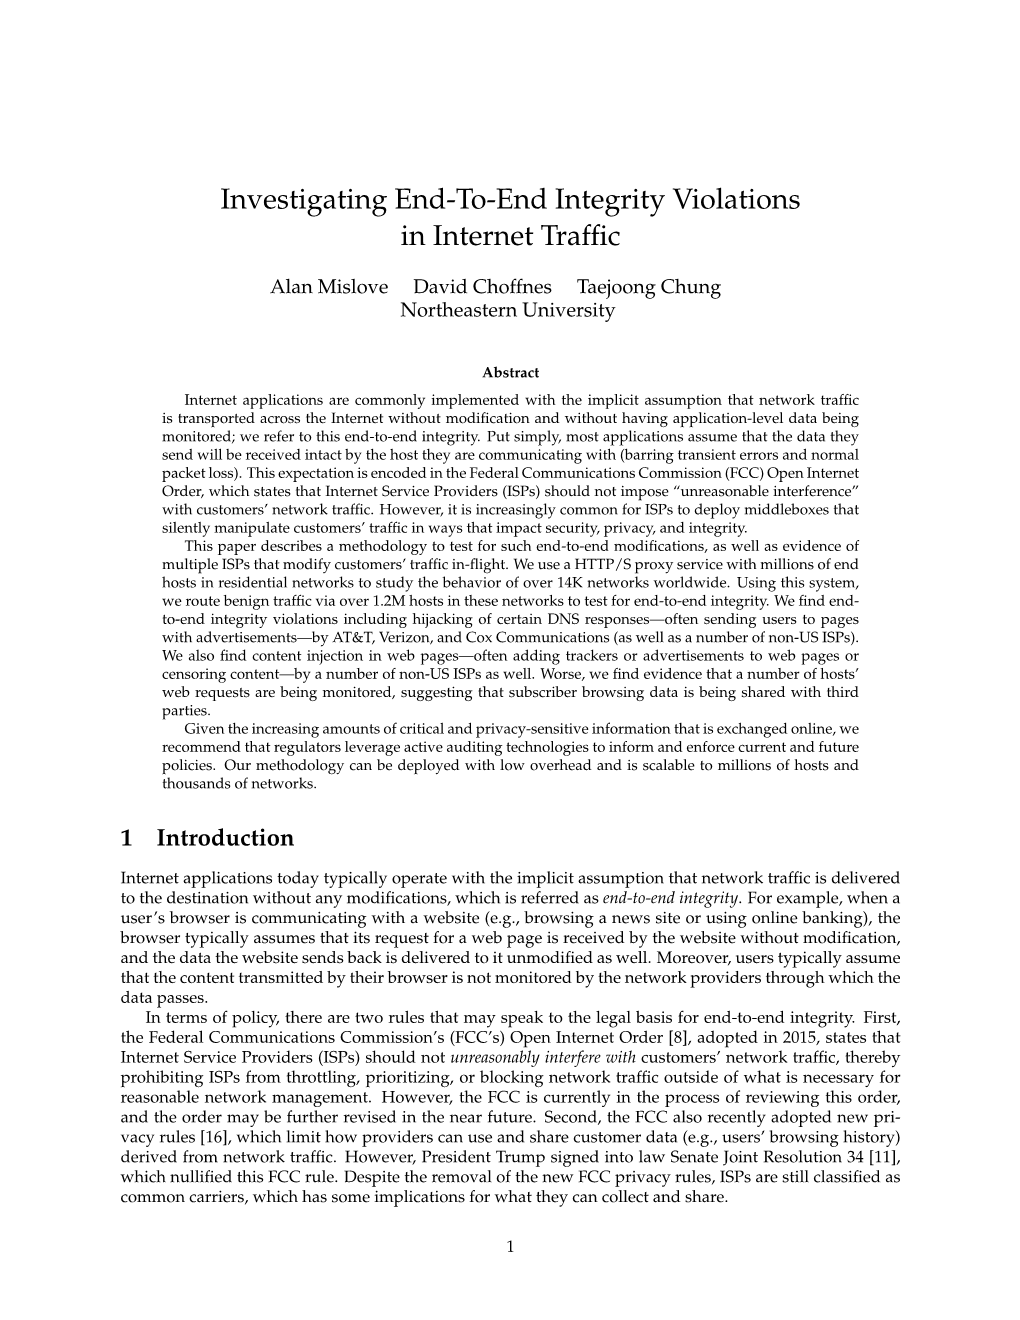 Investigating End-To-End Integrity Violations in Internet Traffic